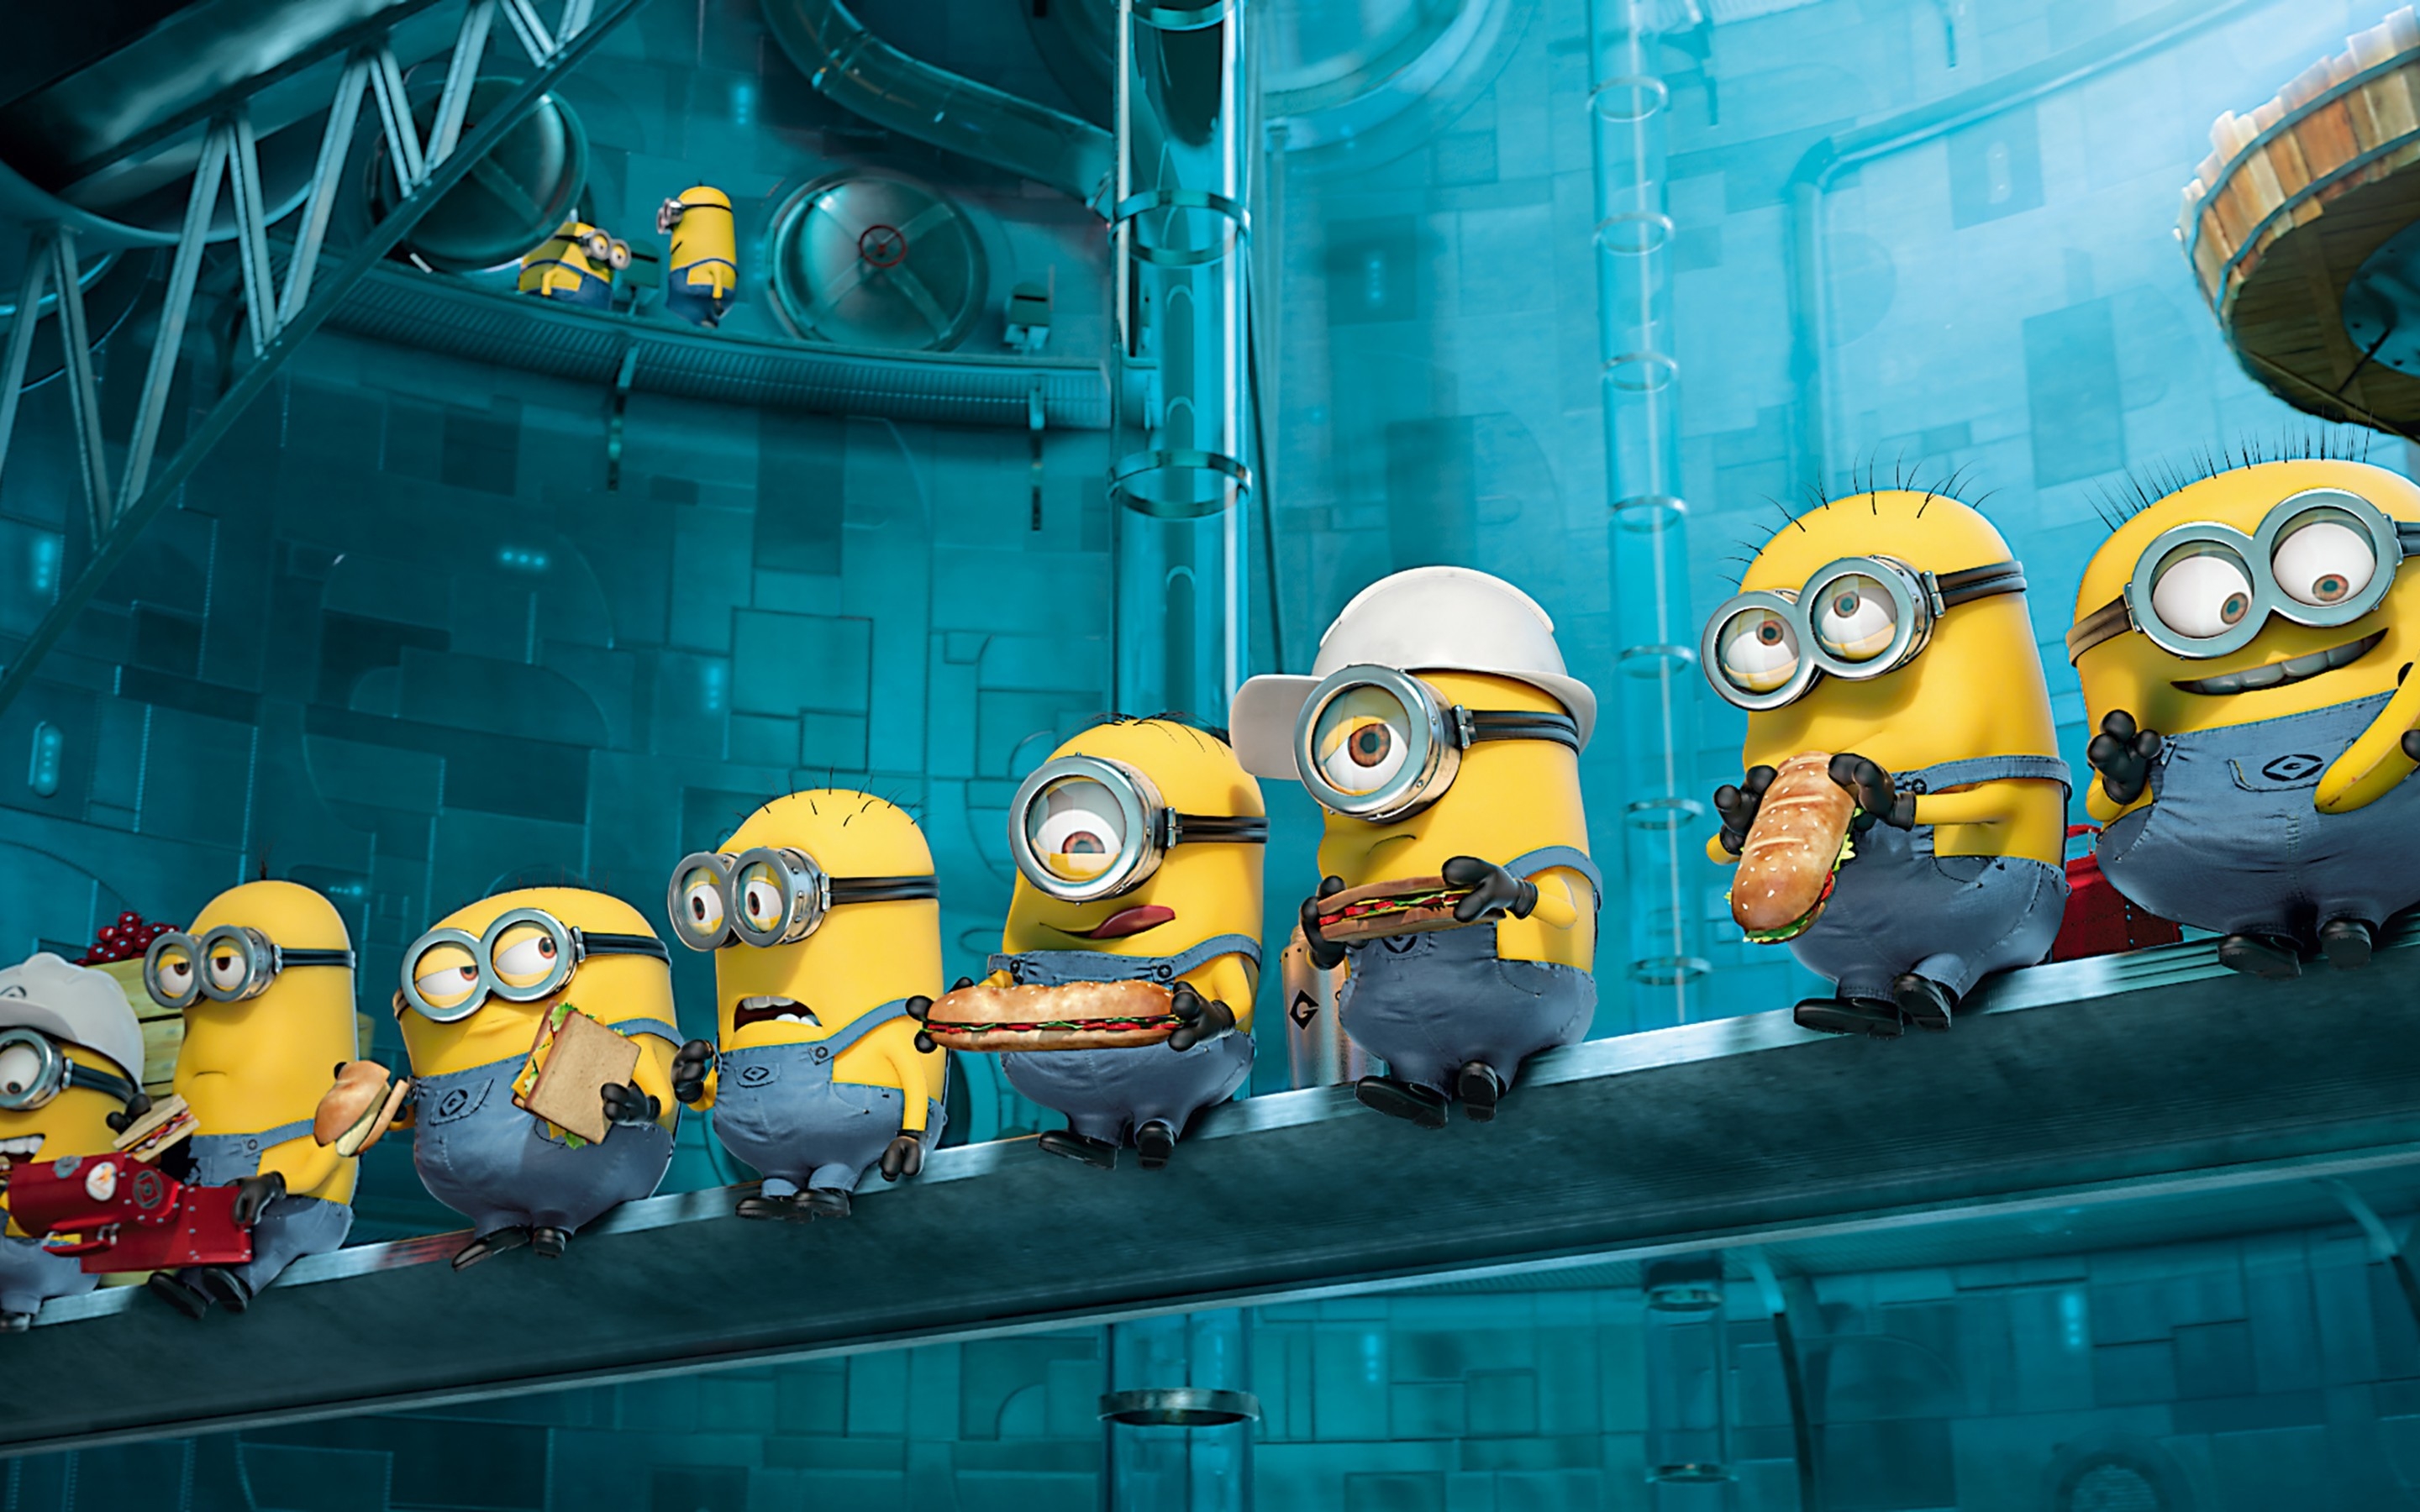 2013 Despicable Me Minions for 2880 x 1800 Retina Display resolution